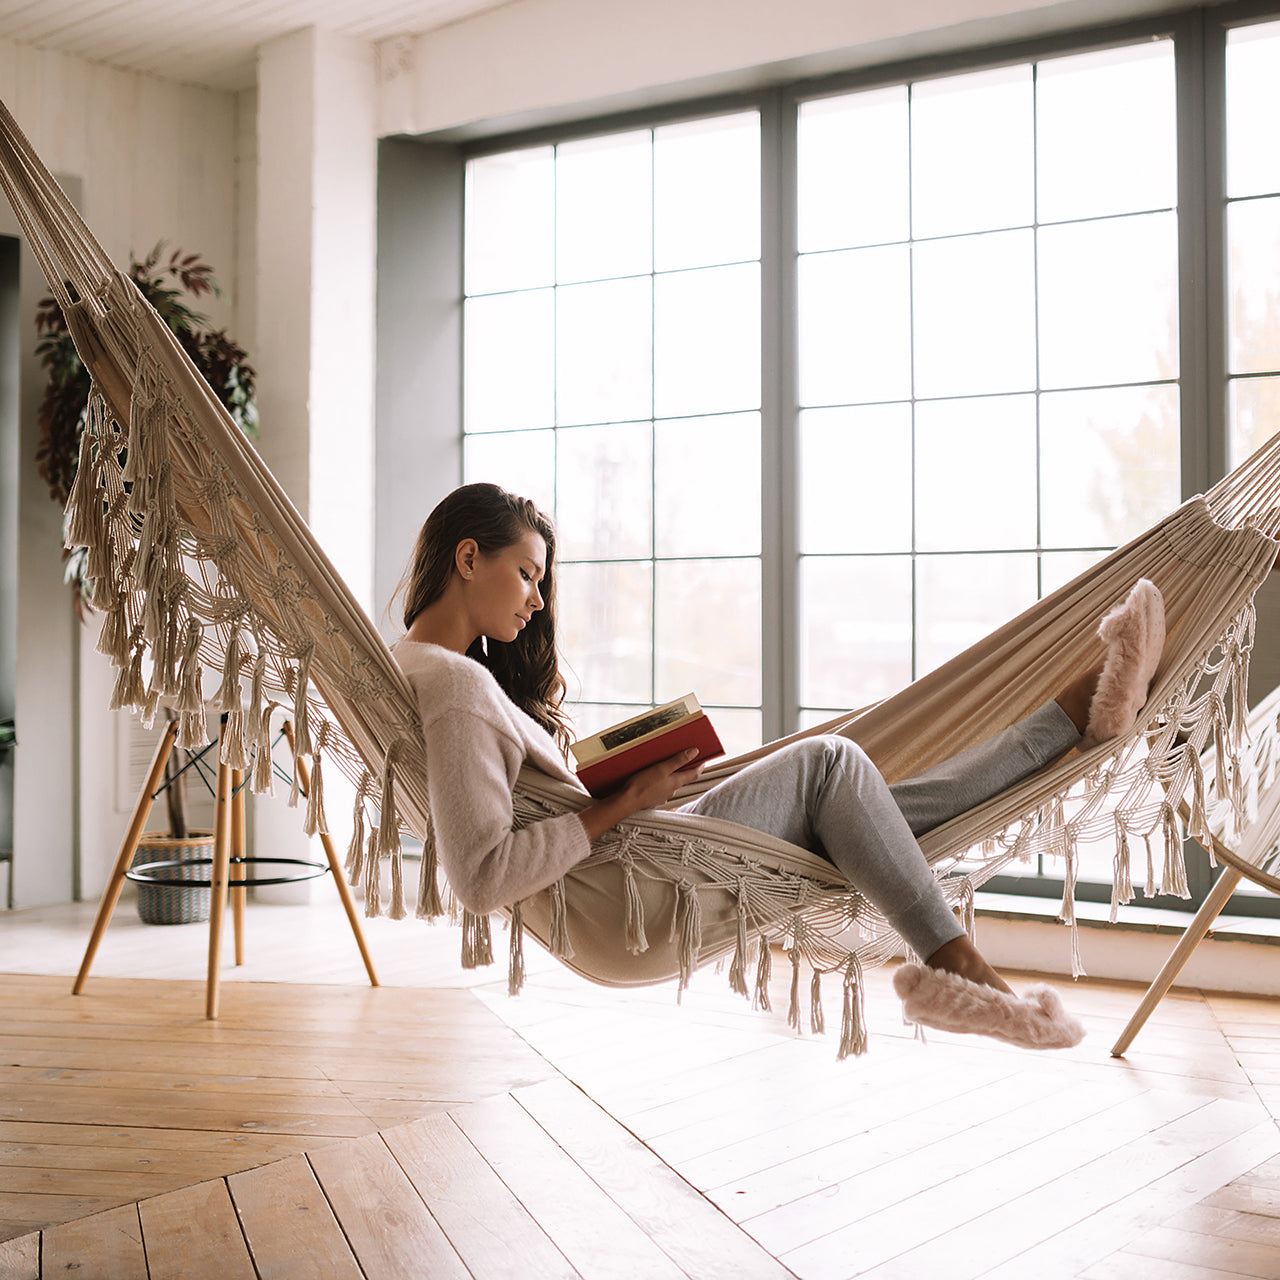 Women reading a book in the Bliss Hammocks 40-inch Wide Hammock in a Bag with Fringe hanging in a room.